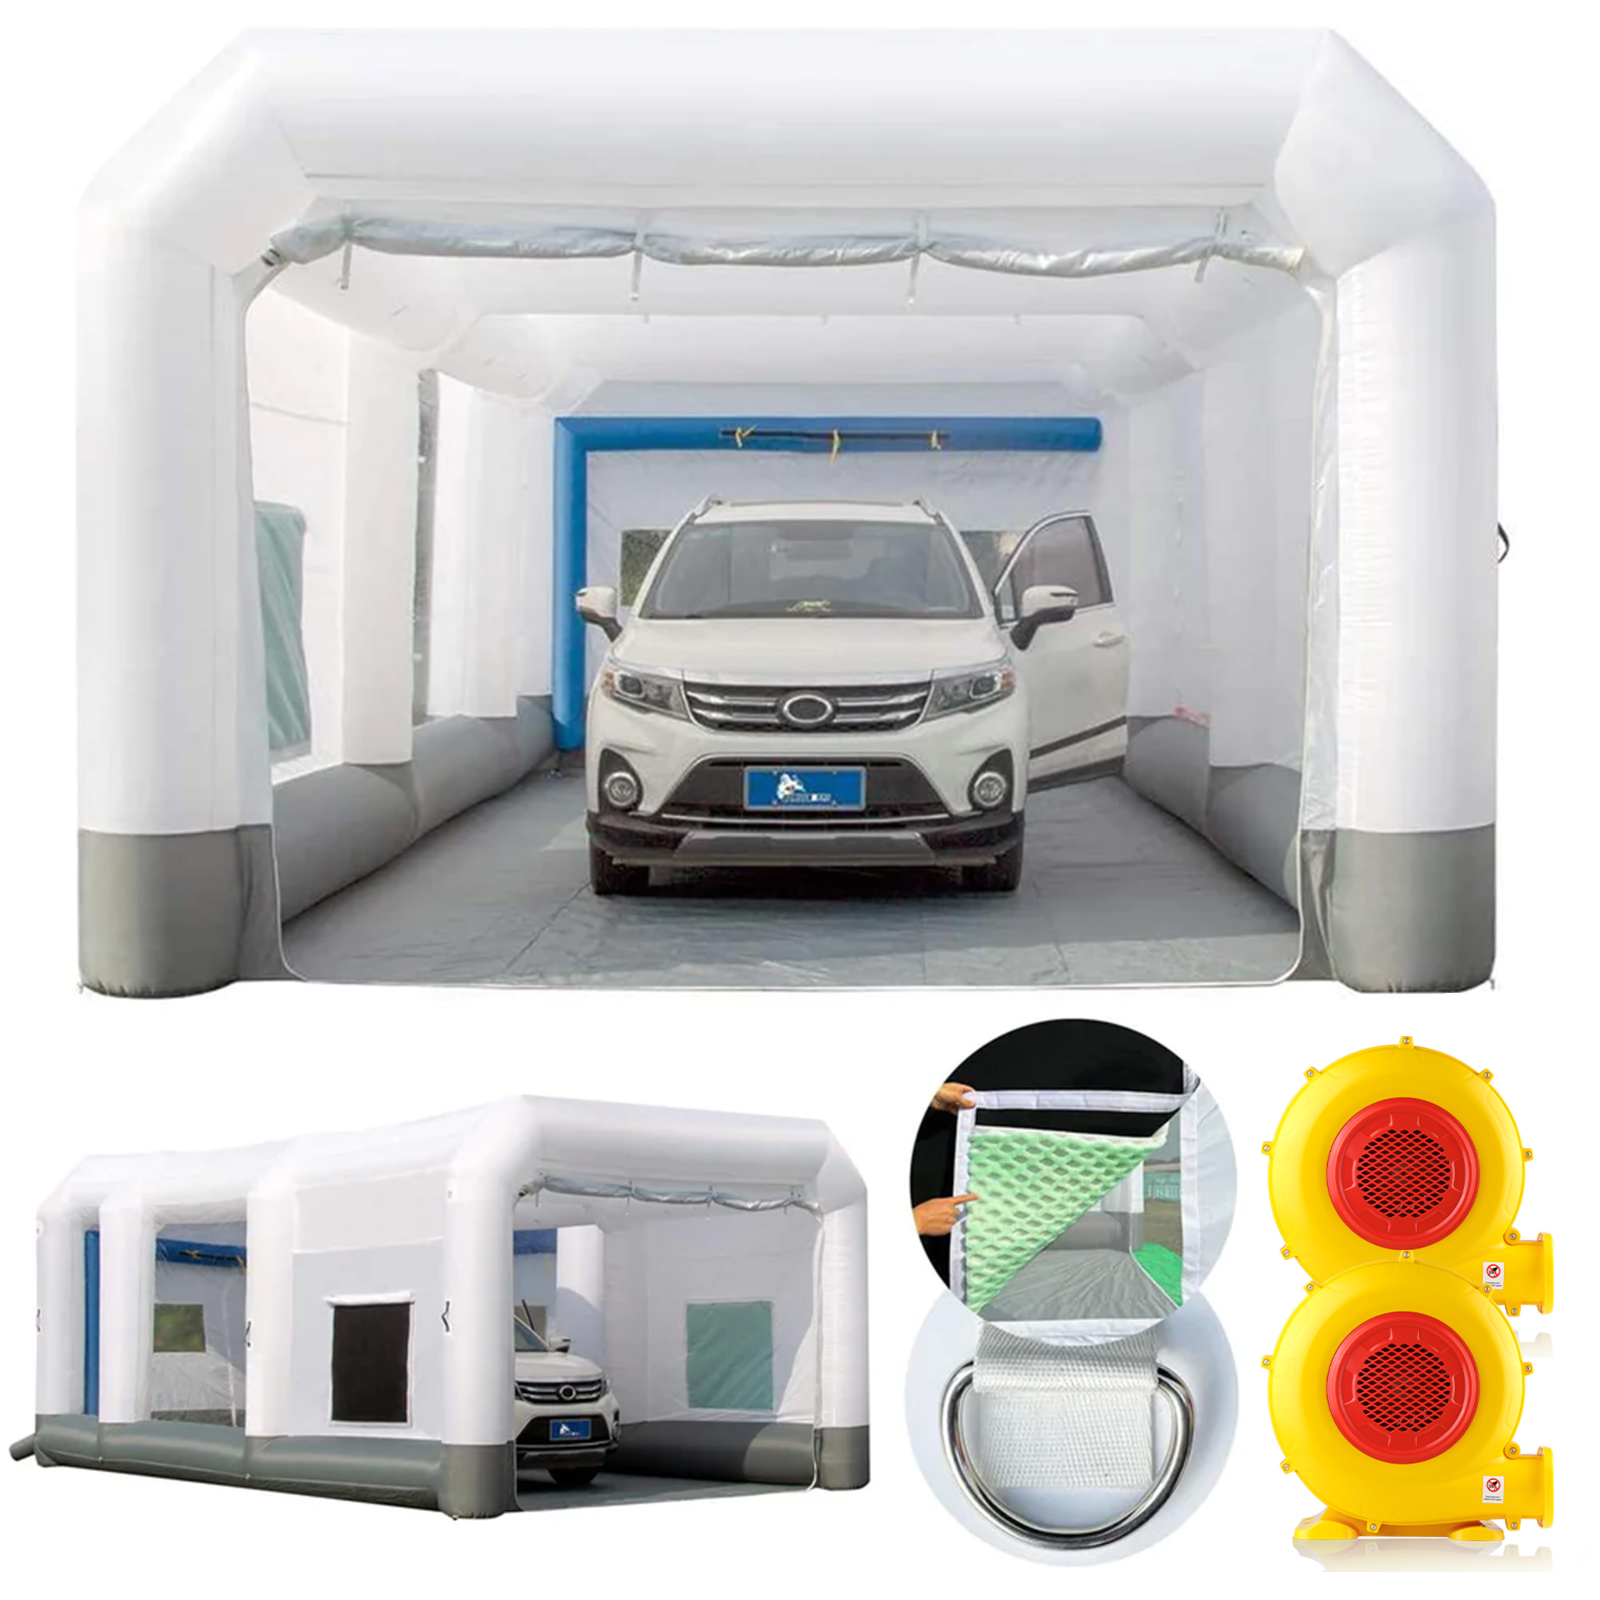 GORILLASPRO Inflatable Paint Booth 26x15x10F with (750W + 950W) Blowers, Upgrade Air Filter System, More Durable Portable Spray Painting Tent Booth